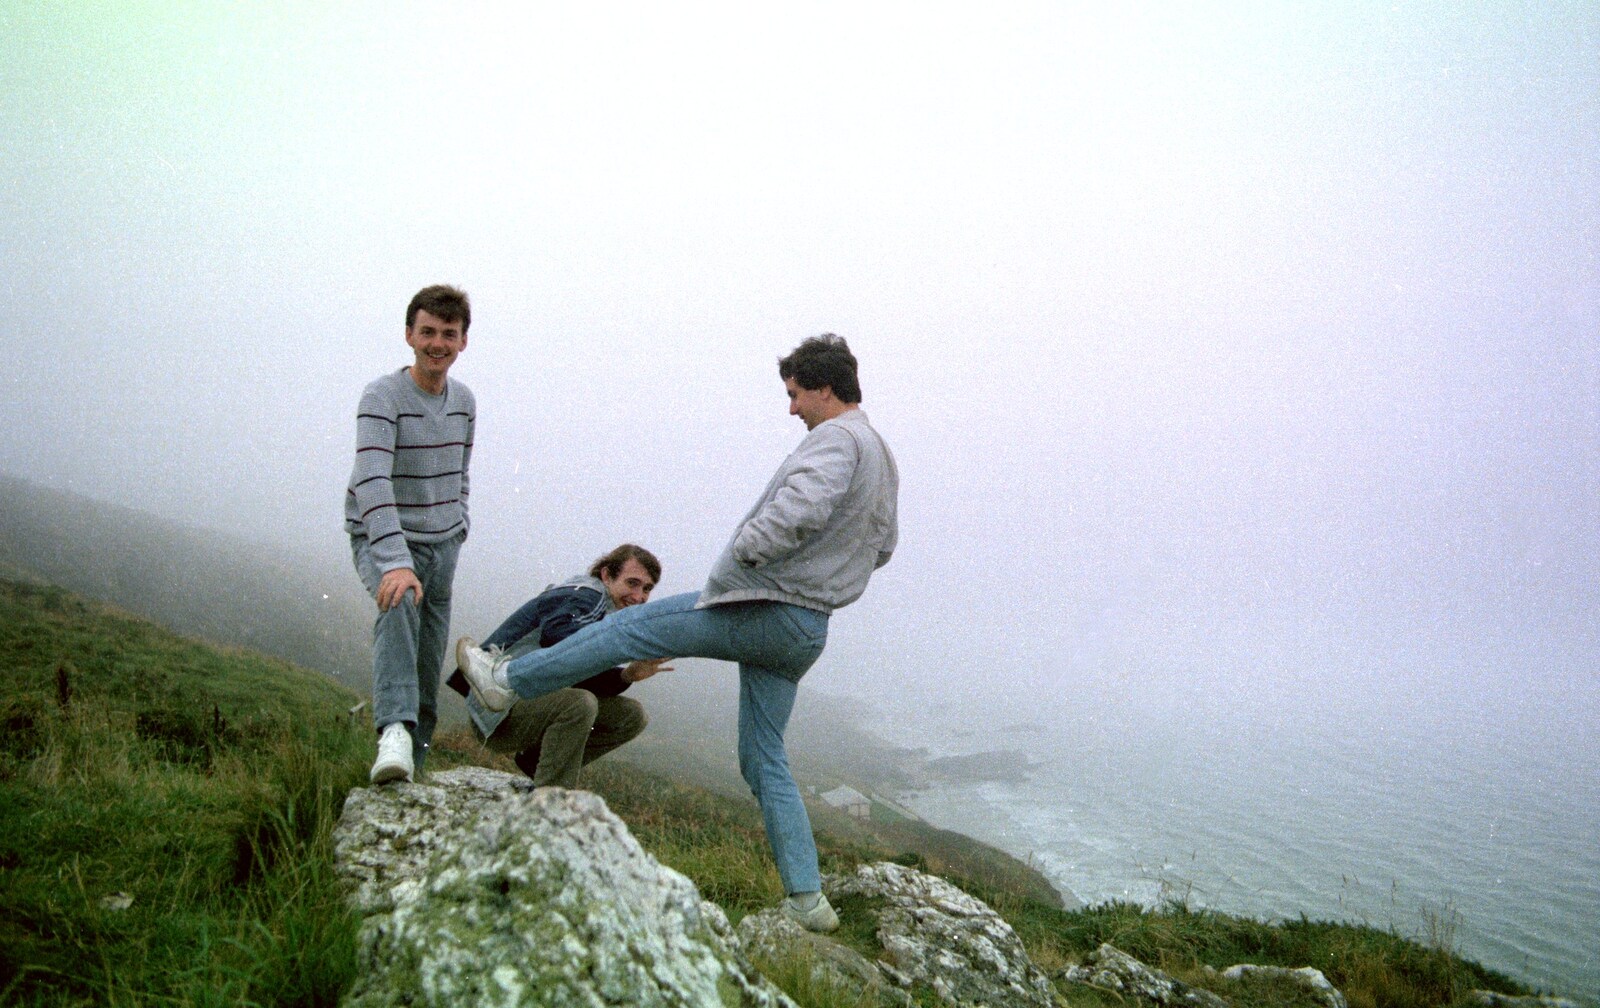 John, Dave and Riki again from A Trip to Trotsky's Mount, Dartmoor, Devon - 20th March 1987